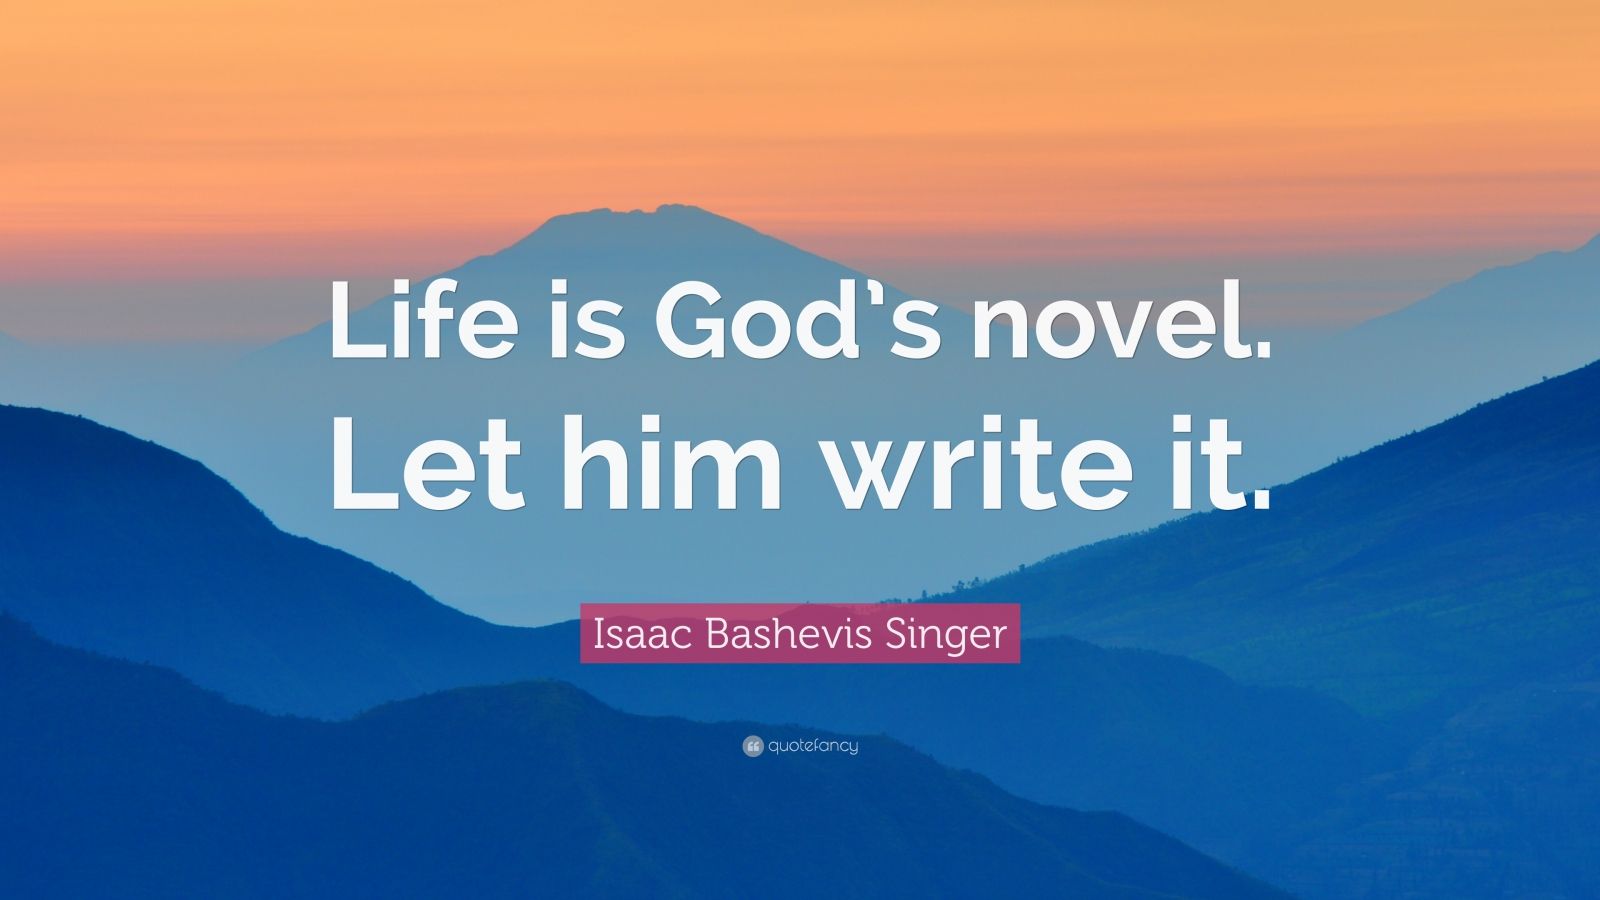 Download Isaac Bashevis Singer Quote: "Life is God's novel. Let him write it." (12 wallpapers) - Quotefancy